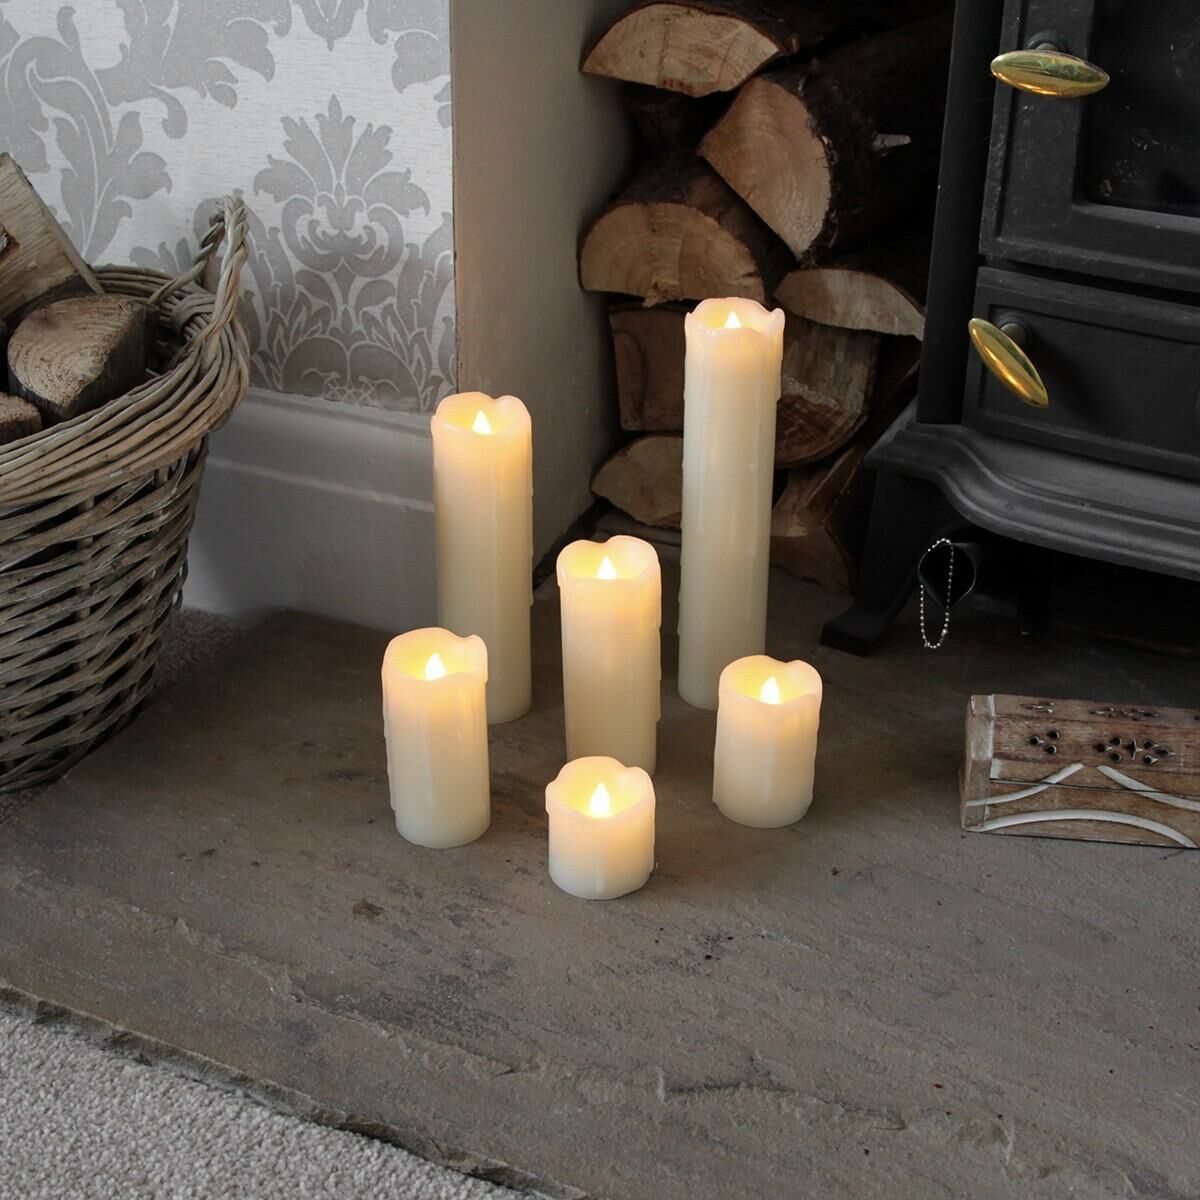 6 Battery Flickering Dripping Wax Pillar LED Candles image 4